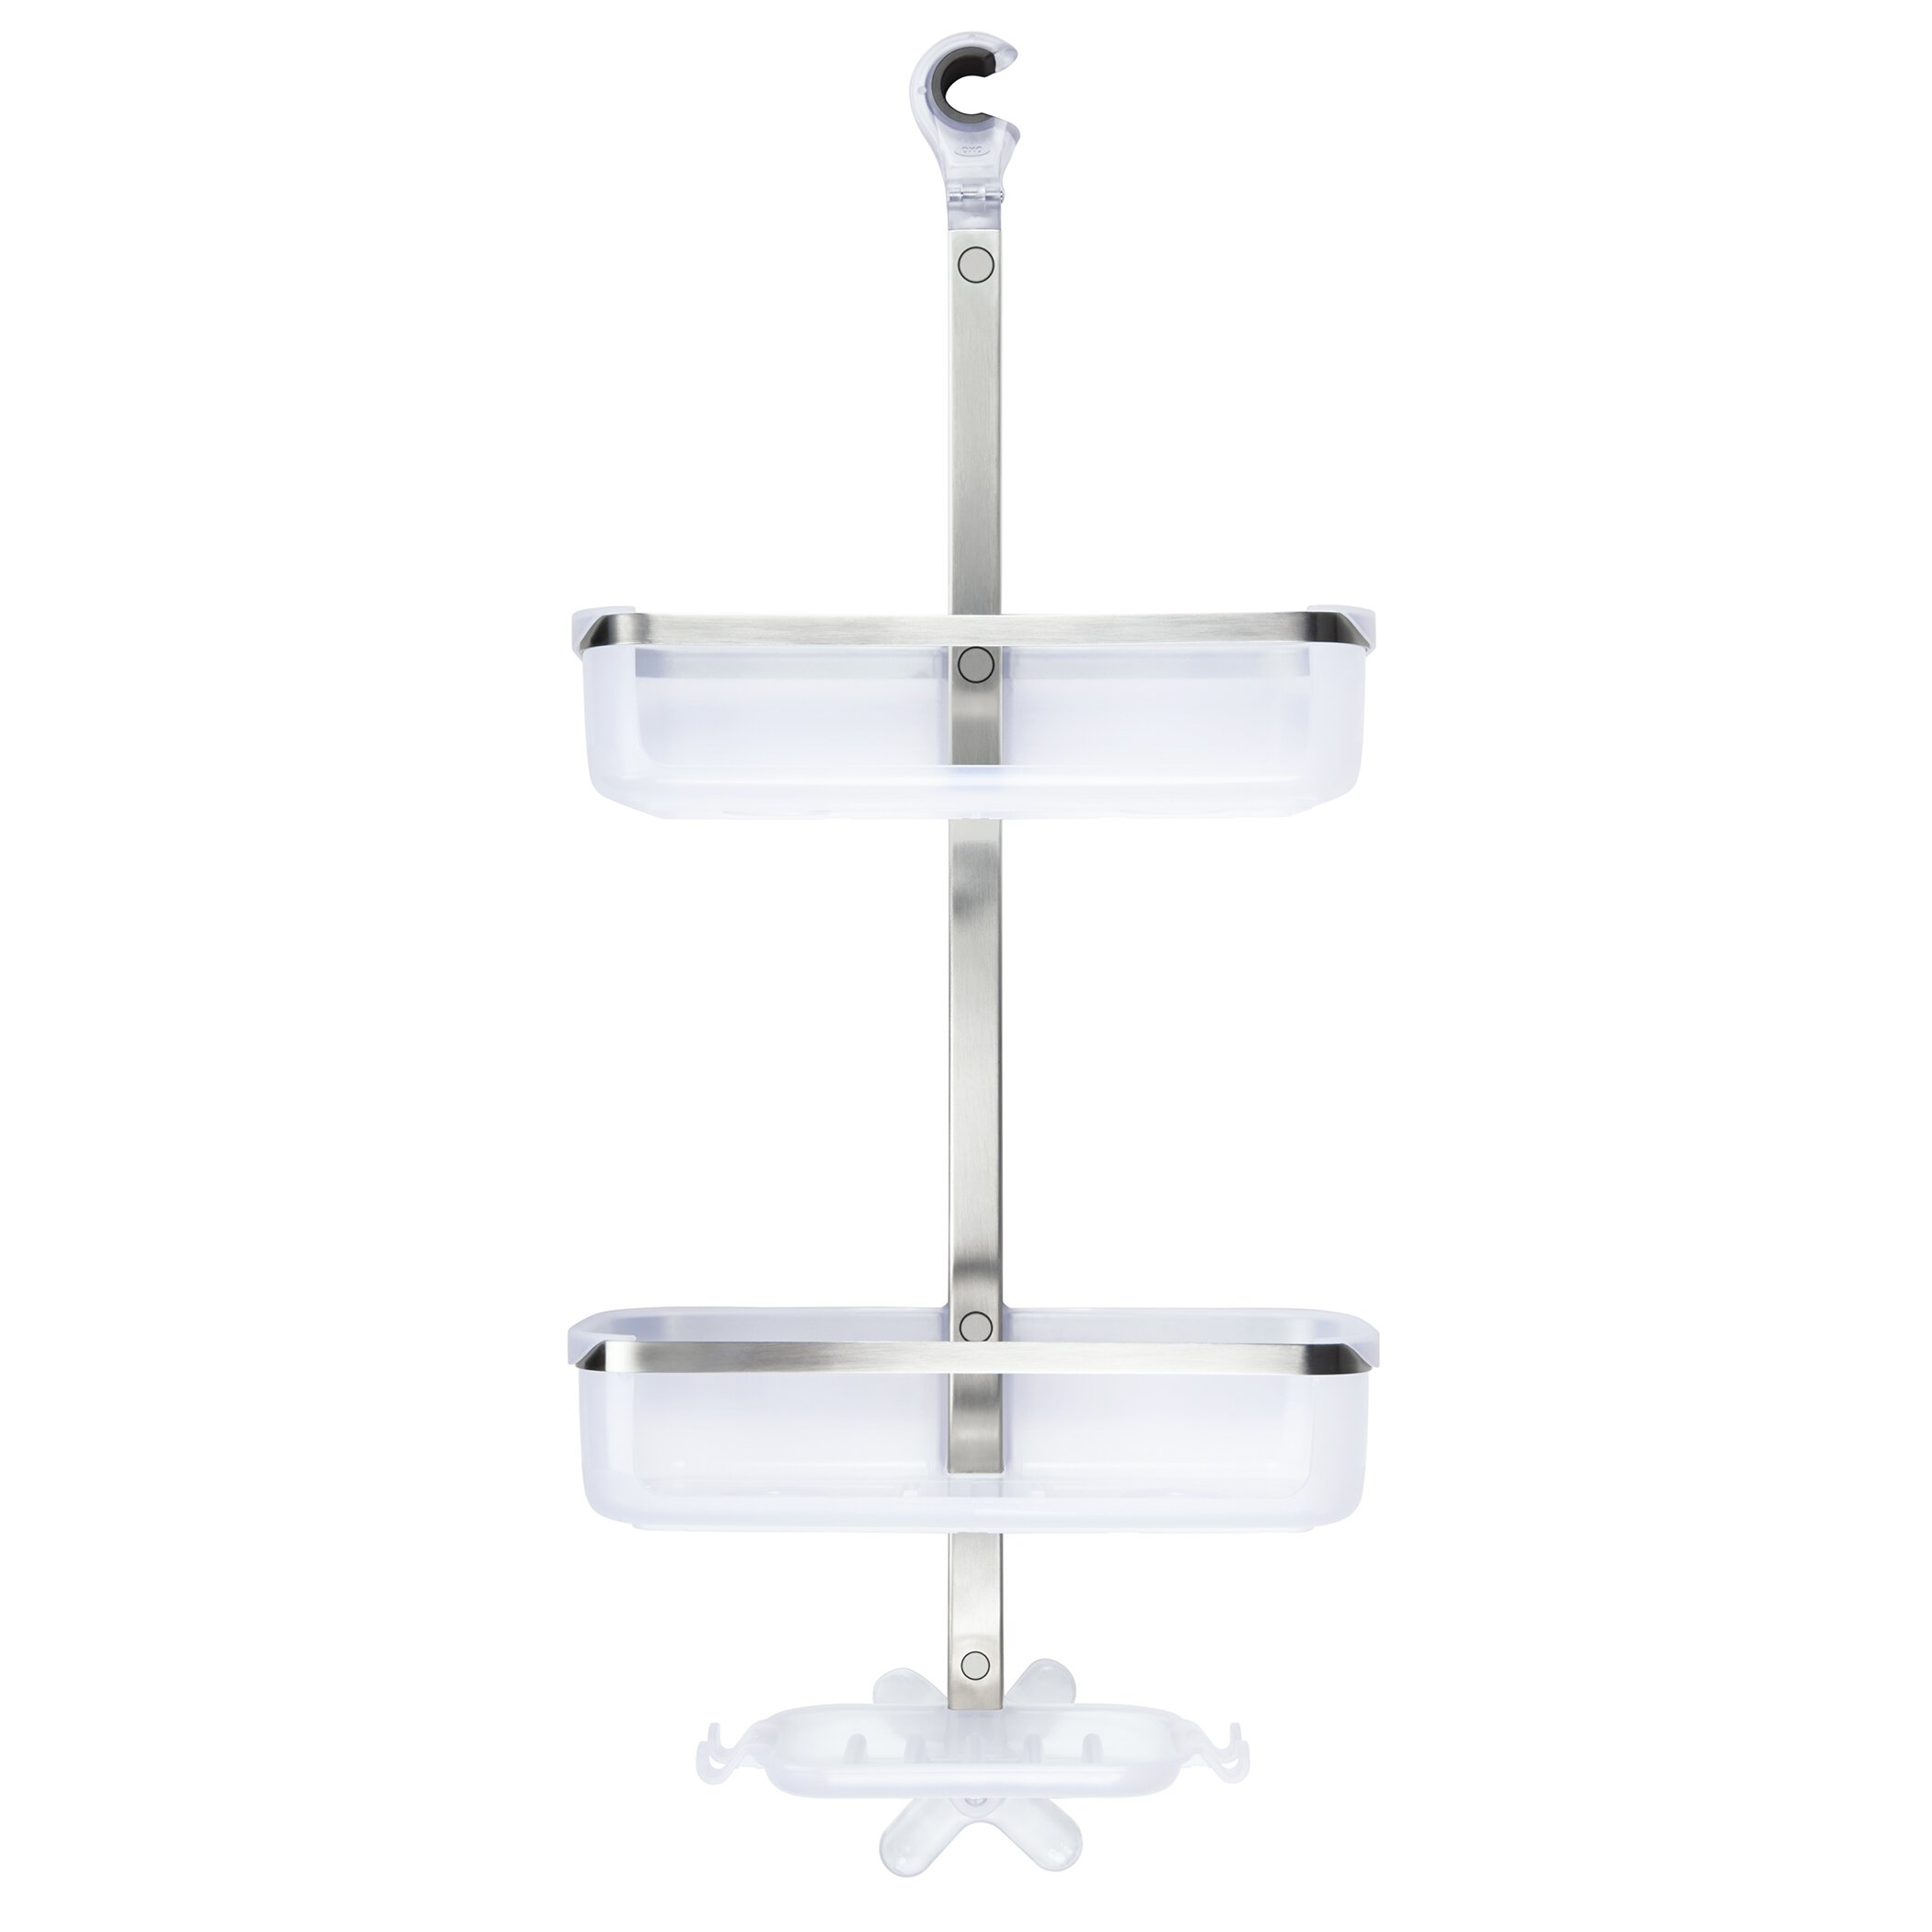 OXO Good Grips Stainless Steel Wall Mounted 3 Tier Shower Caddy | Wayfair